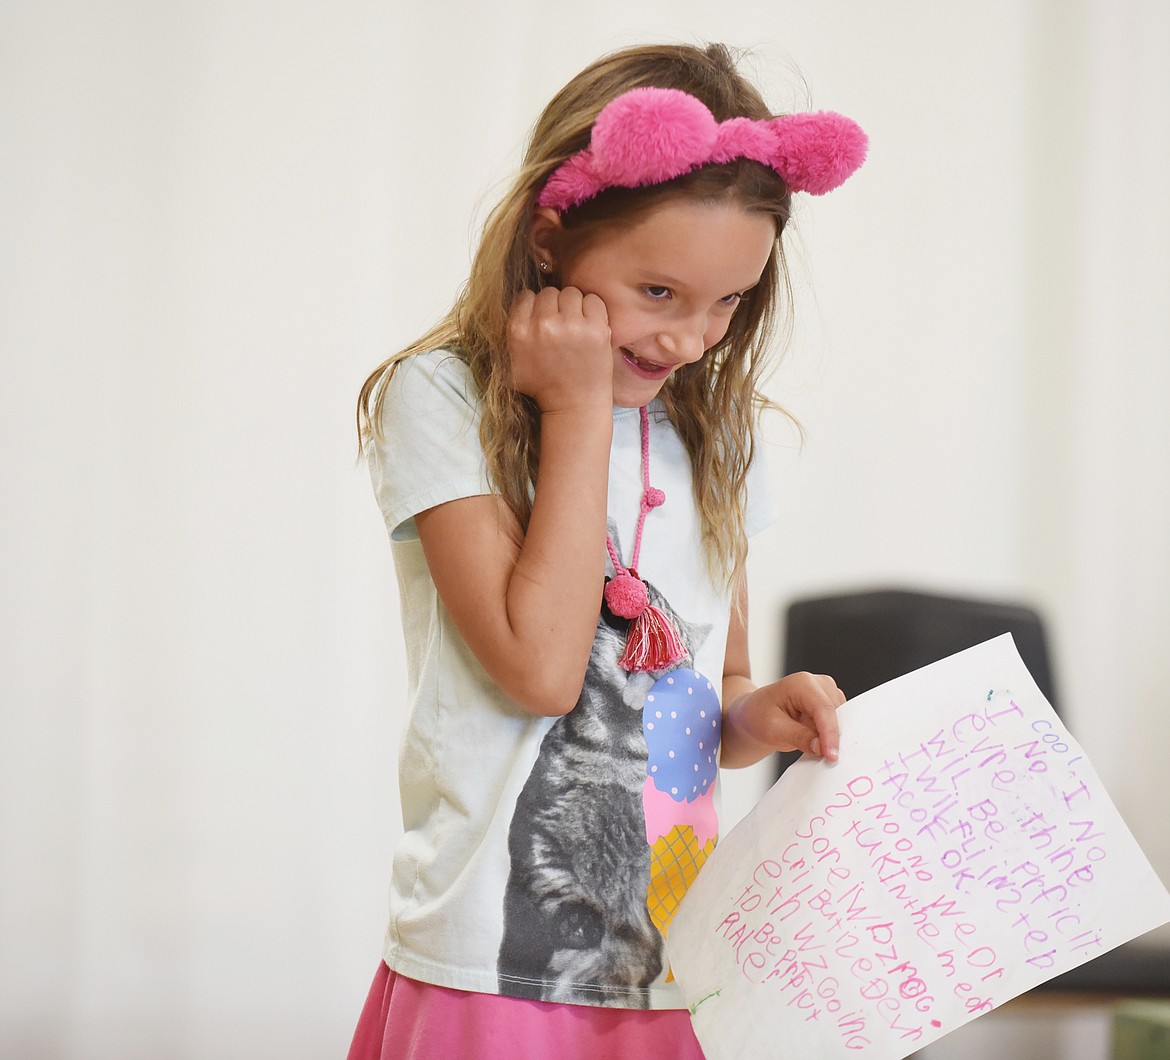 Bronwen Prew pretends to cry while holding her script during a practice session at the Whitefish Theatre Co. summer performance camp recently at the O&#146;Shaughnessy Center. Participants wrote the play and brought it to life for the audience in one week. (Heidi Desch/Whitefish Pilot)